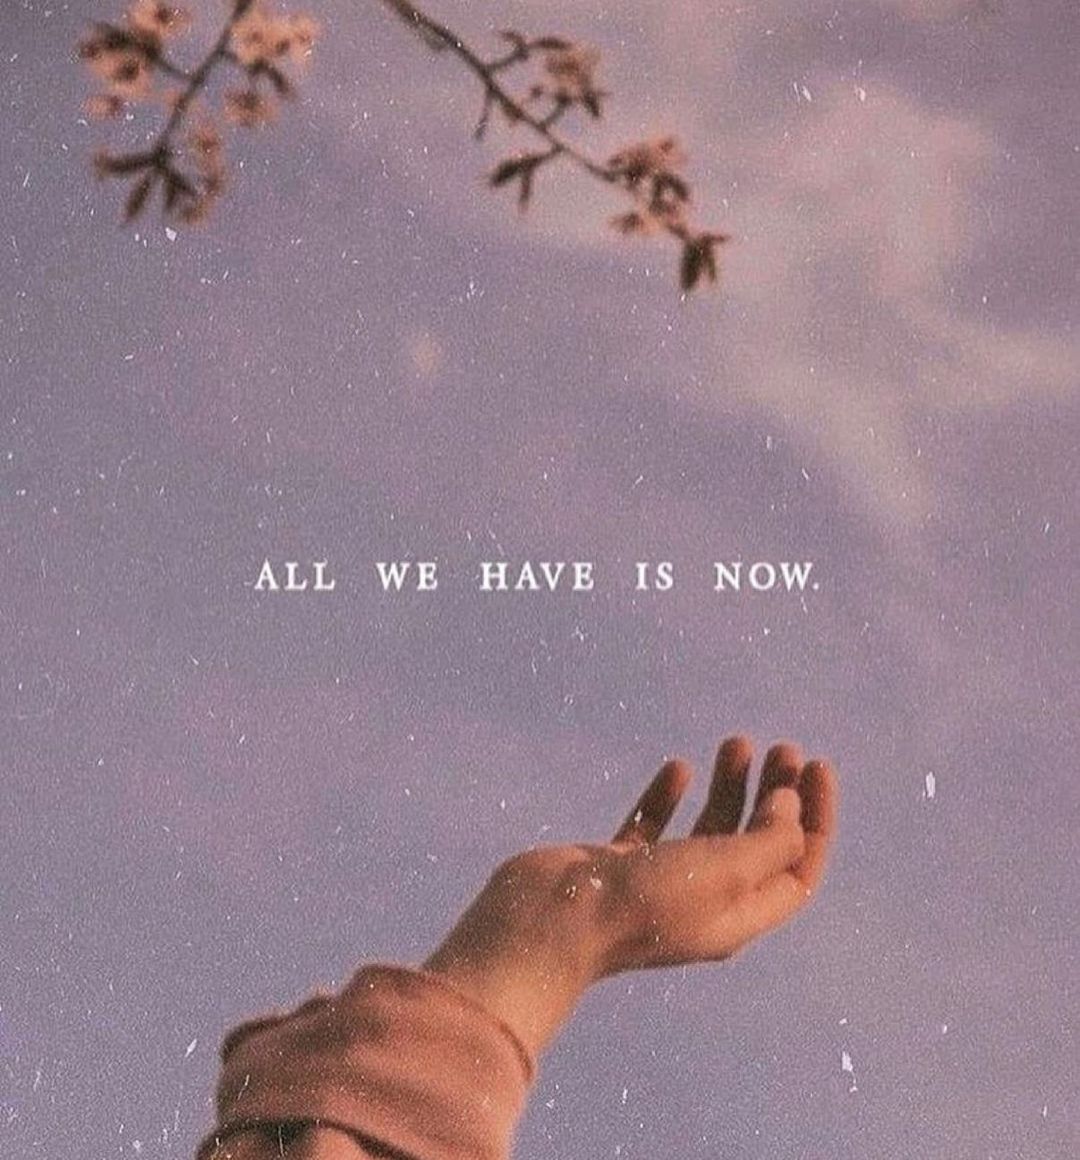 All we have is now.